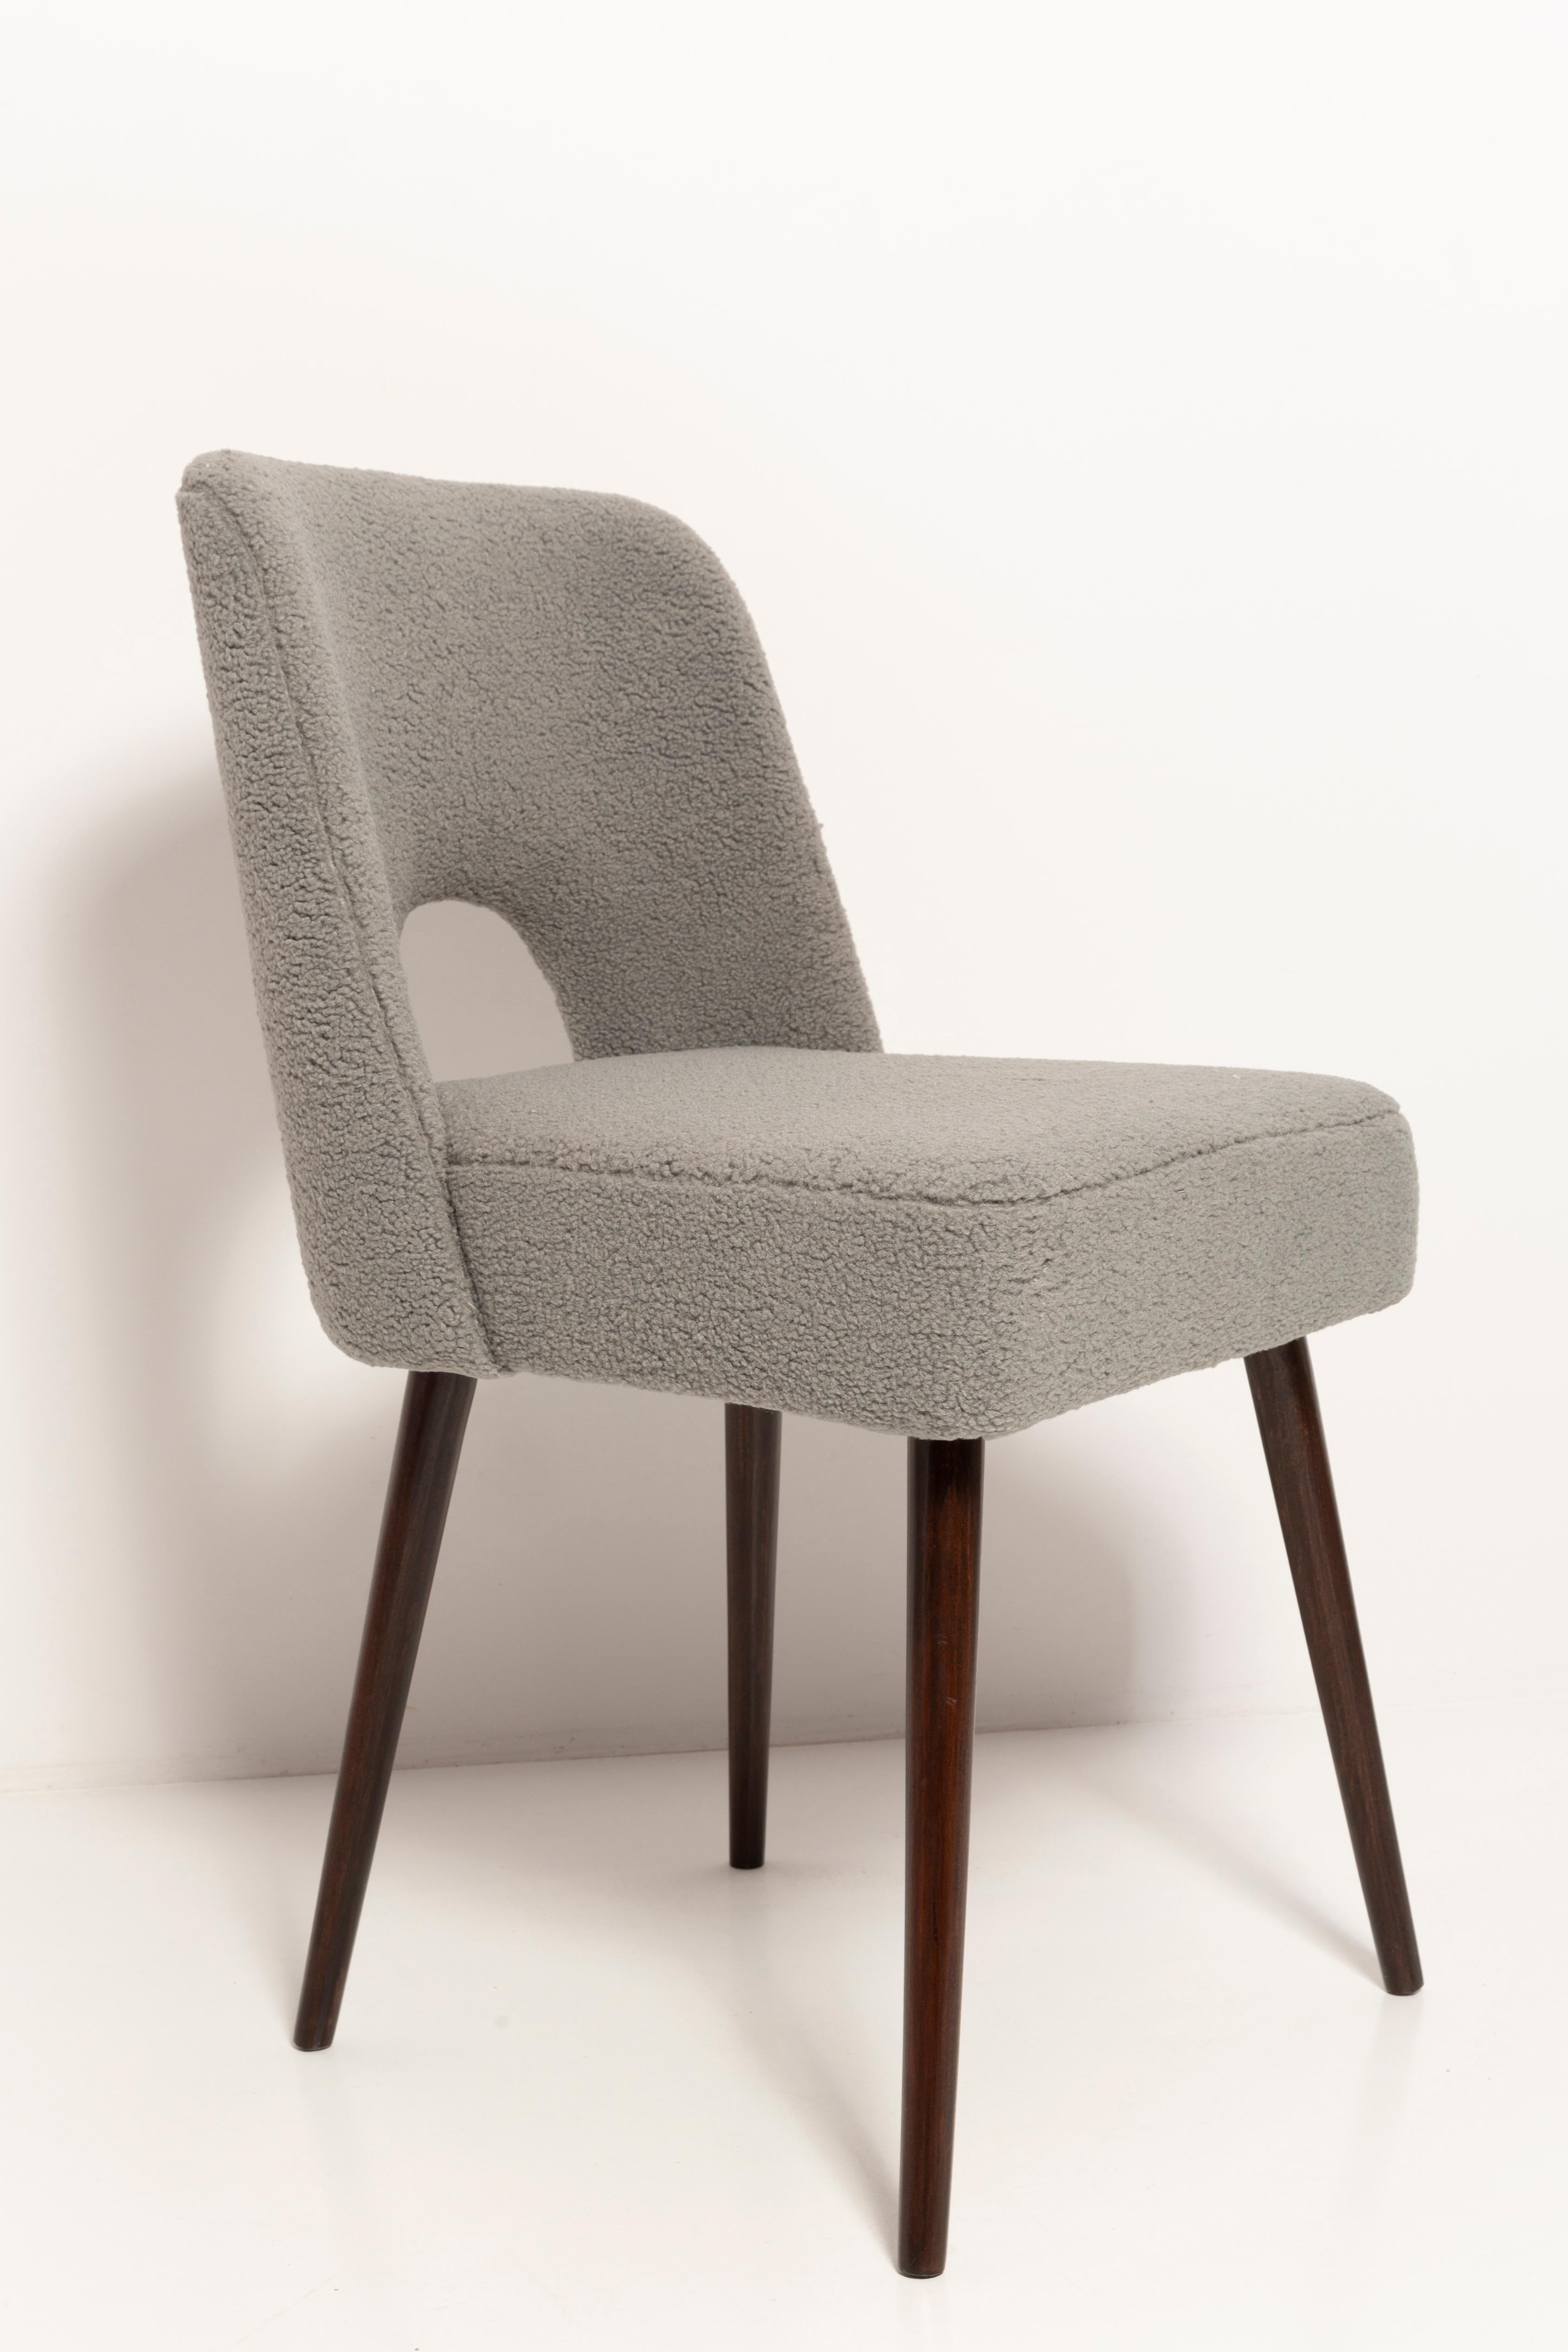 Mid-Century Modern Gray Boucle 'Shell' Chair, Europe, 1960s For Sale